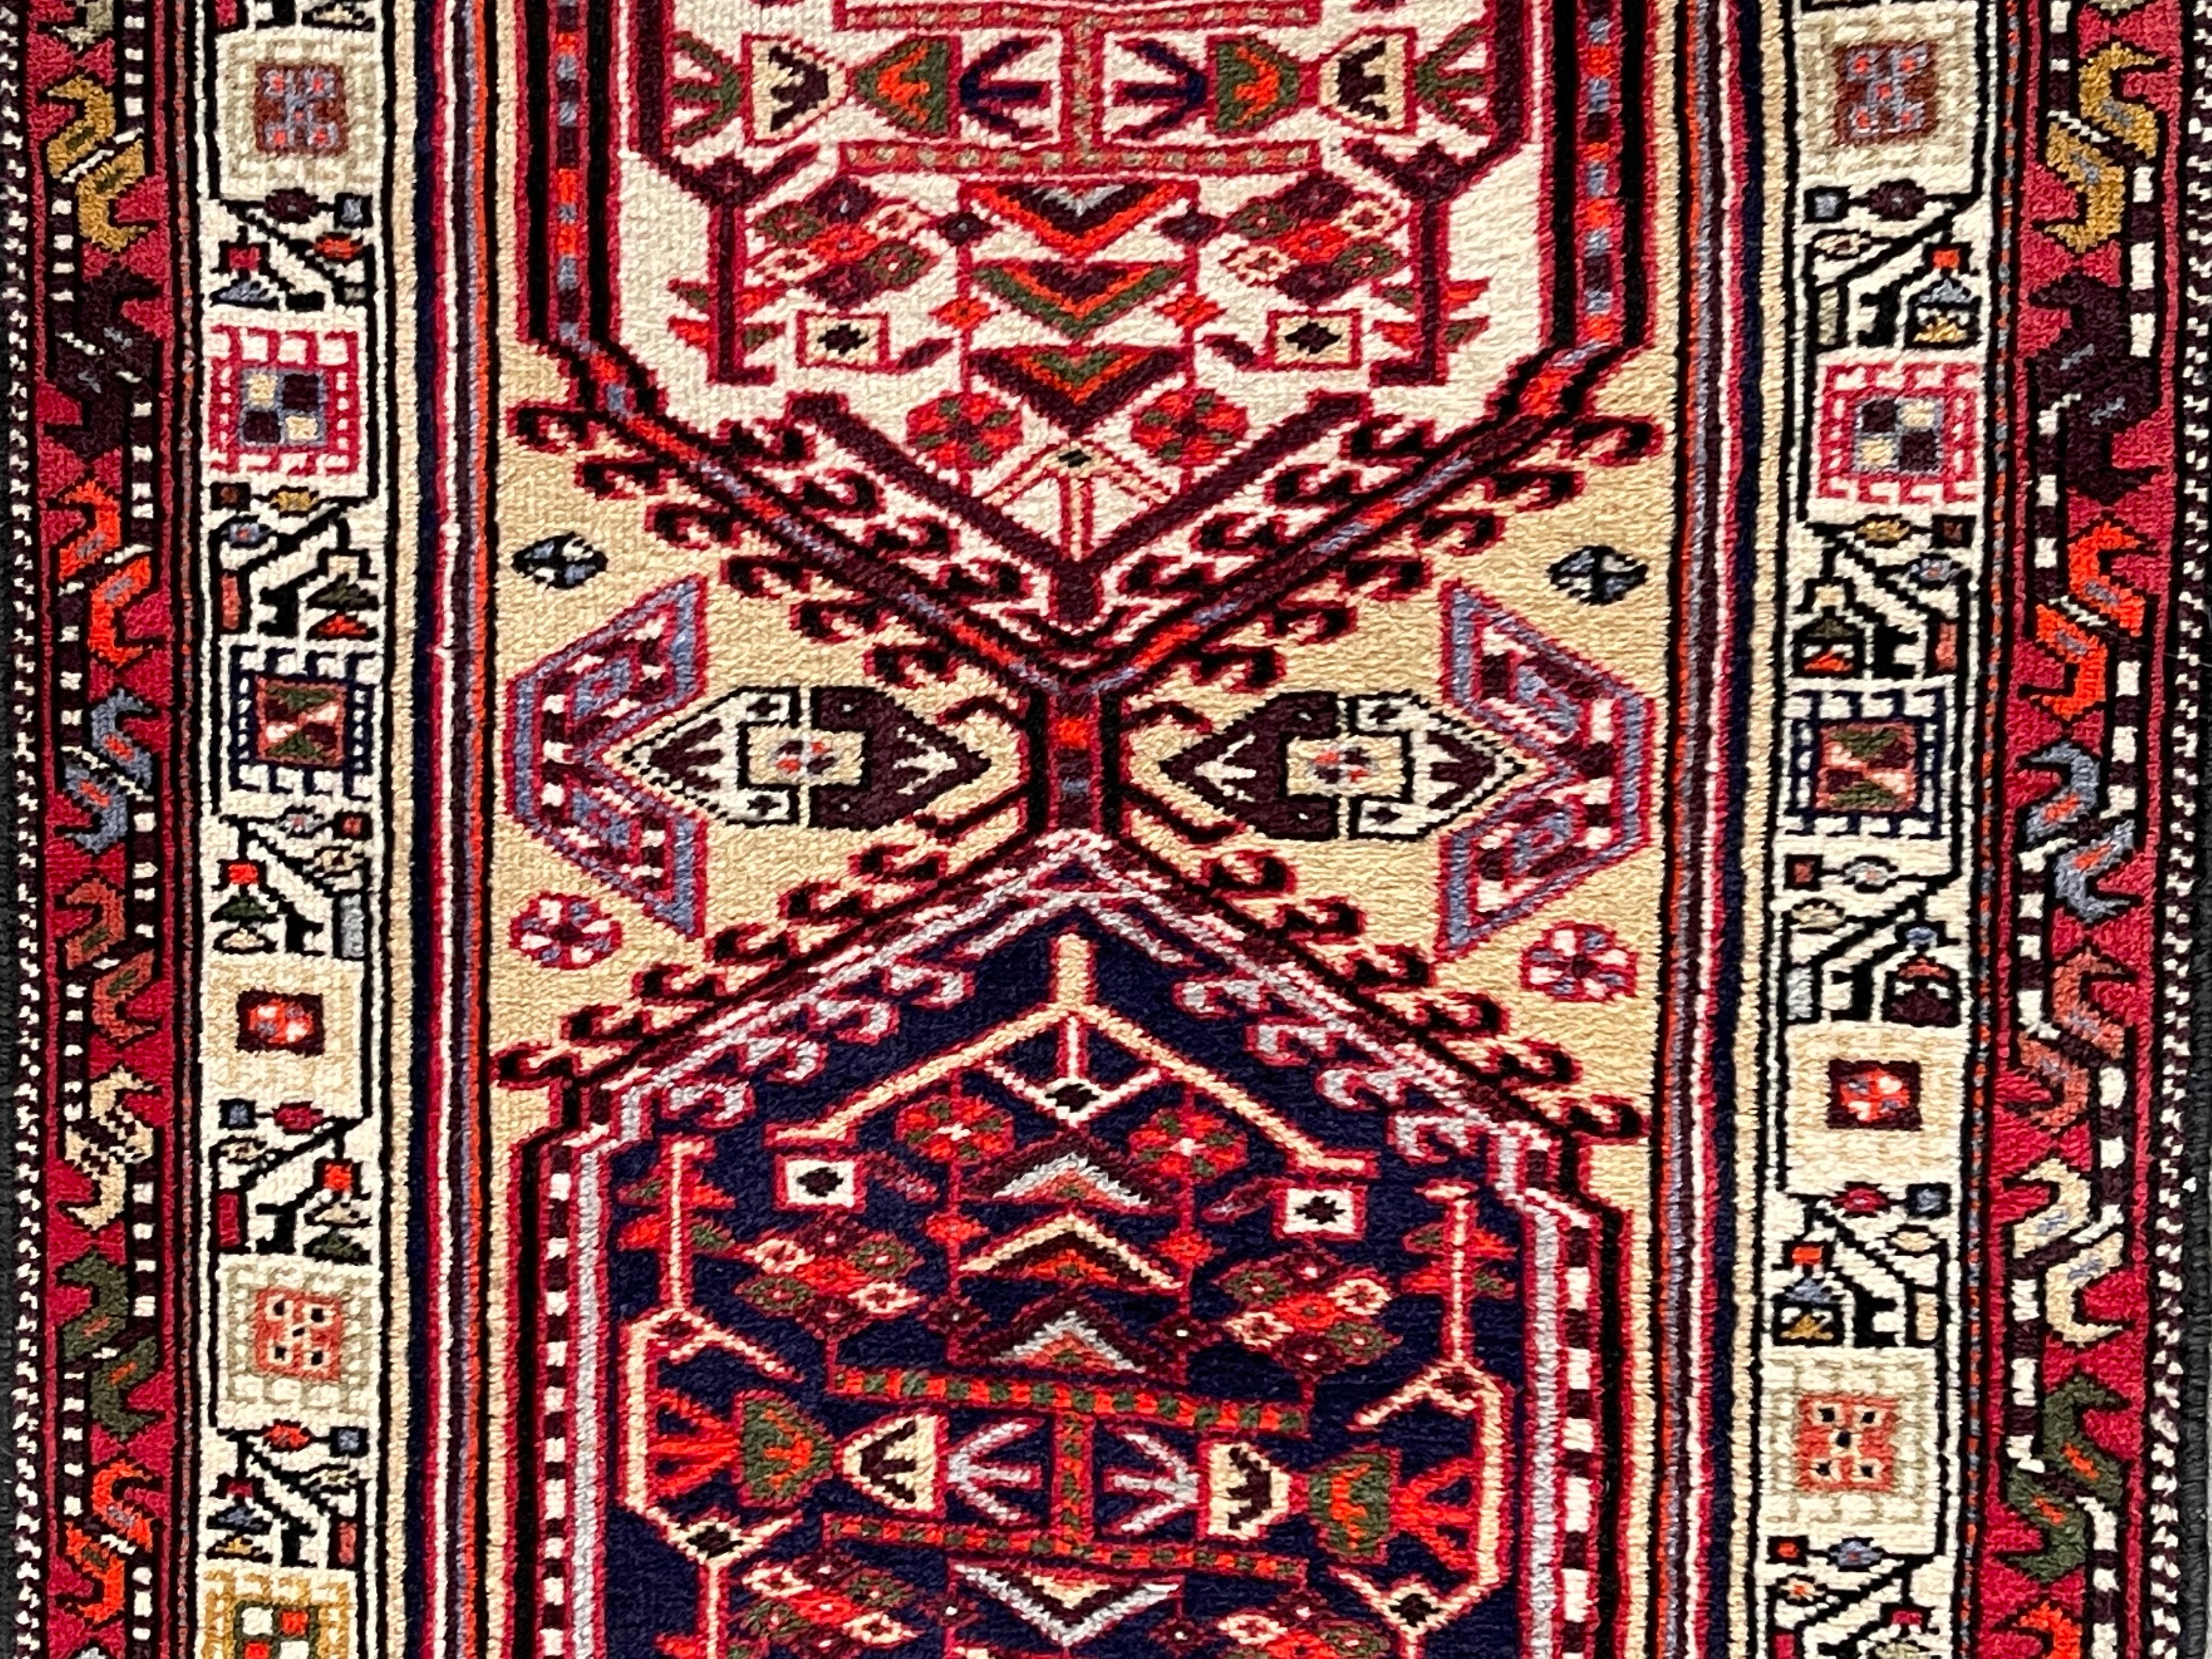 20th Century Persian Lavar Kerman Runner Rug with a beautiful unique design in burgundy/ navy/ gold and tan. Made out of silk and wool and expertly hand knotted. In great vintage condition.

Measures: 2'-8